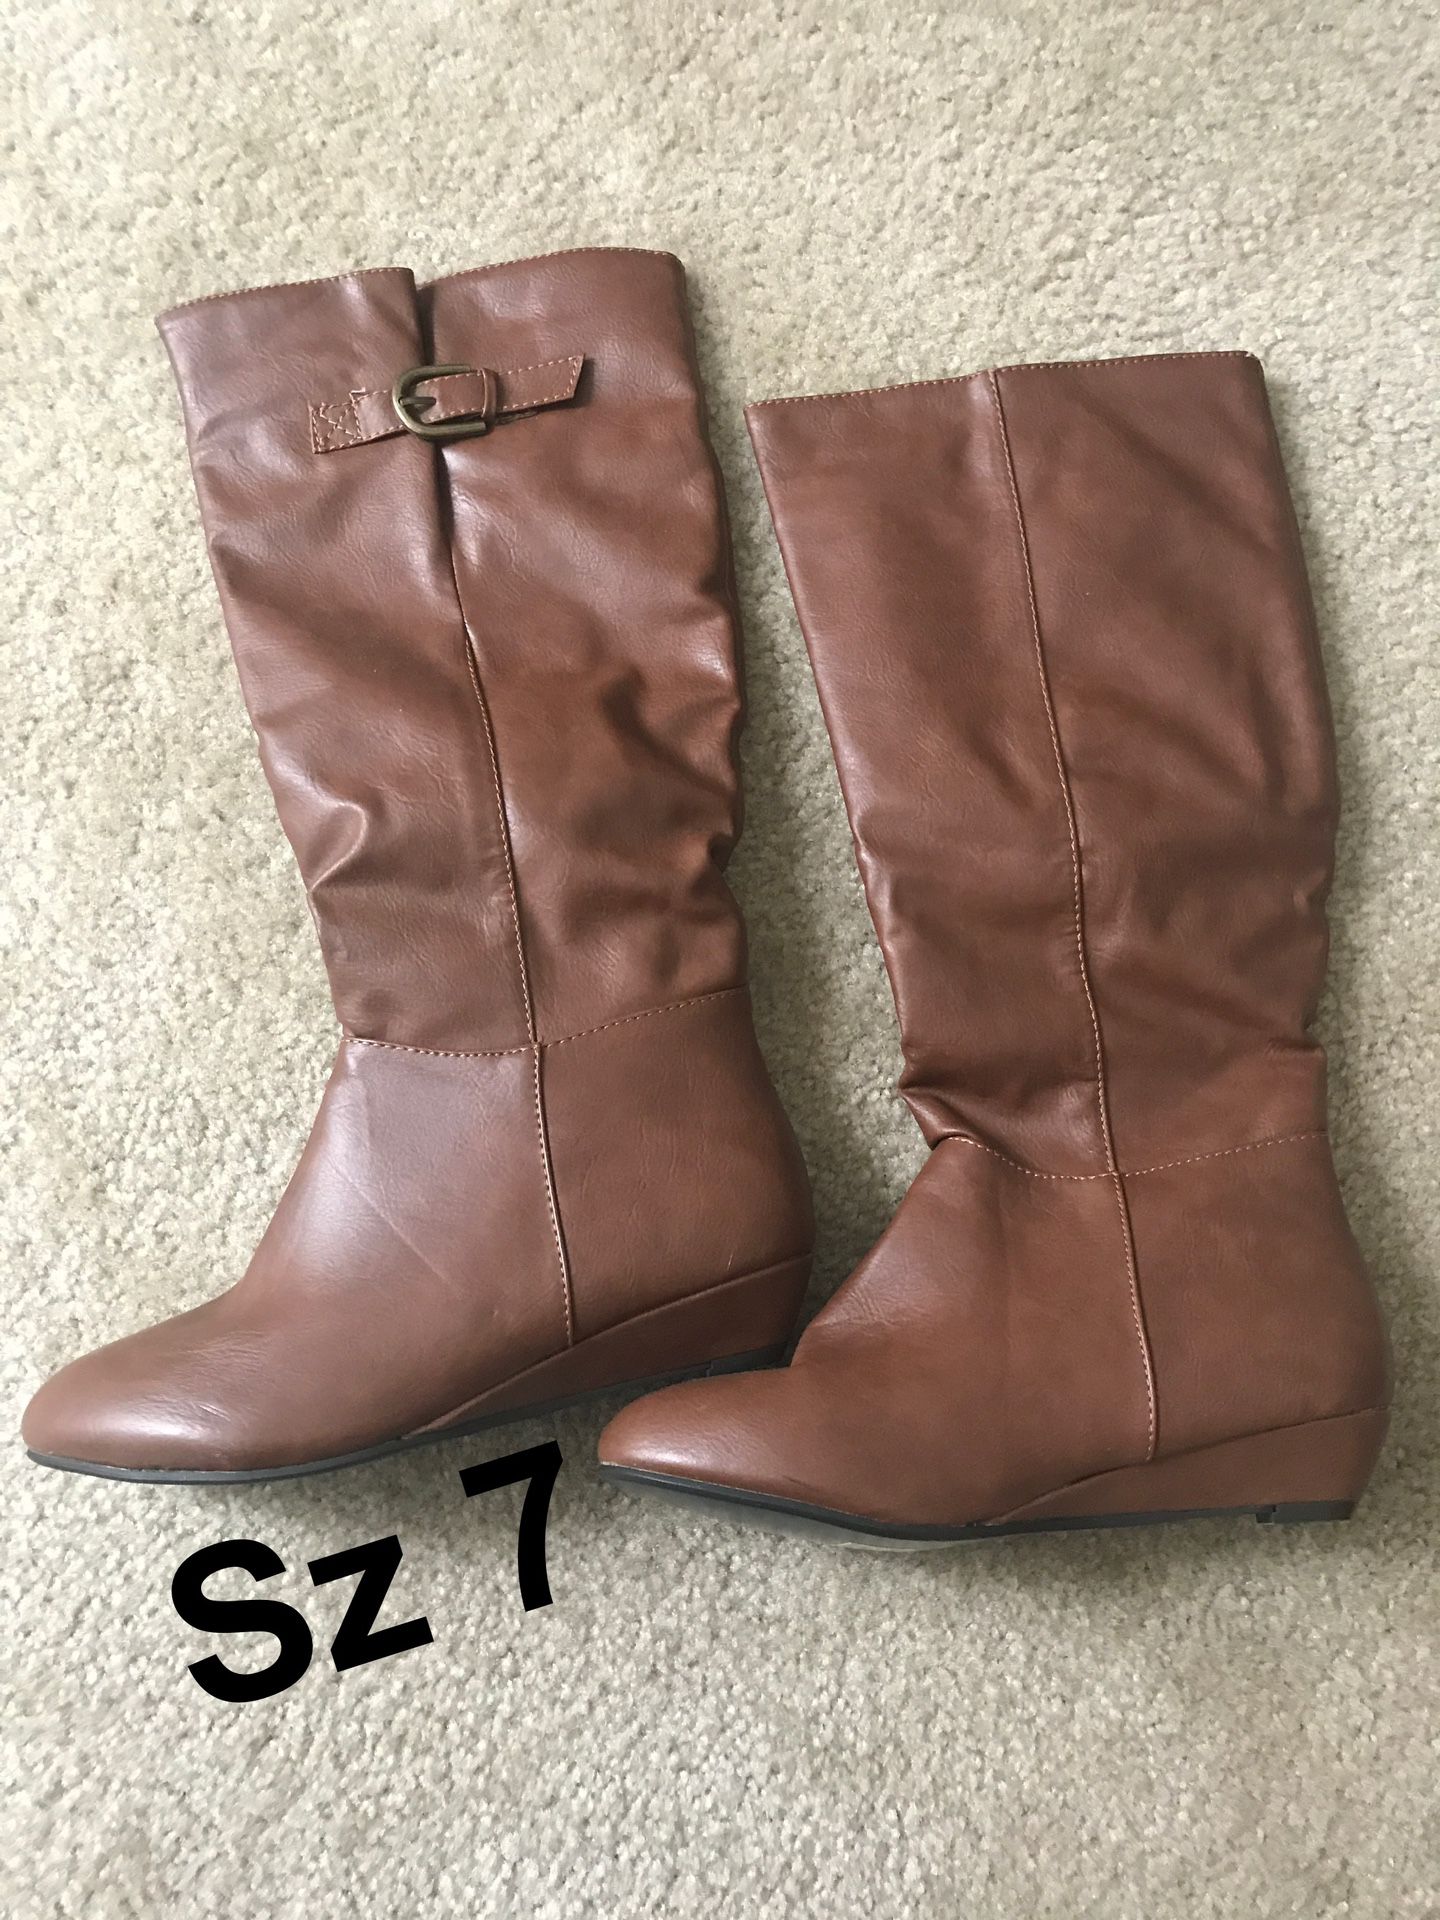 Brand New Brown Wedge Boots size 7 Botas Cafe para mujer